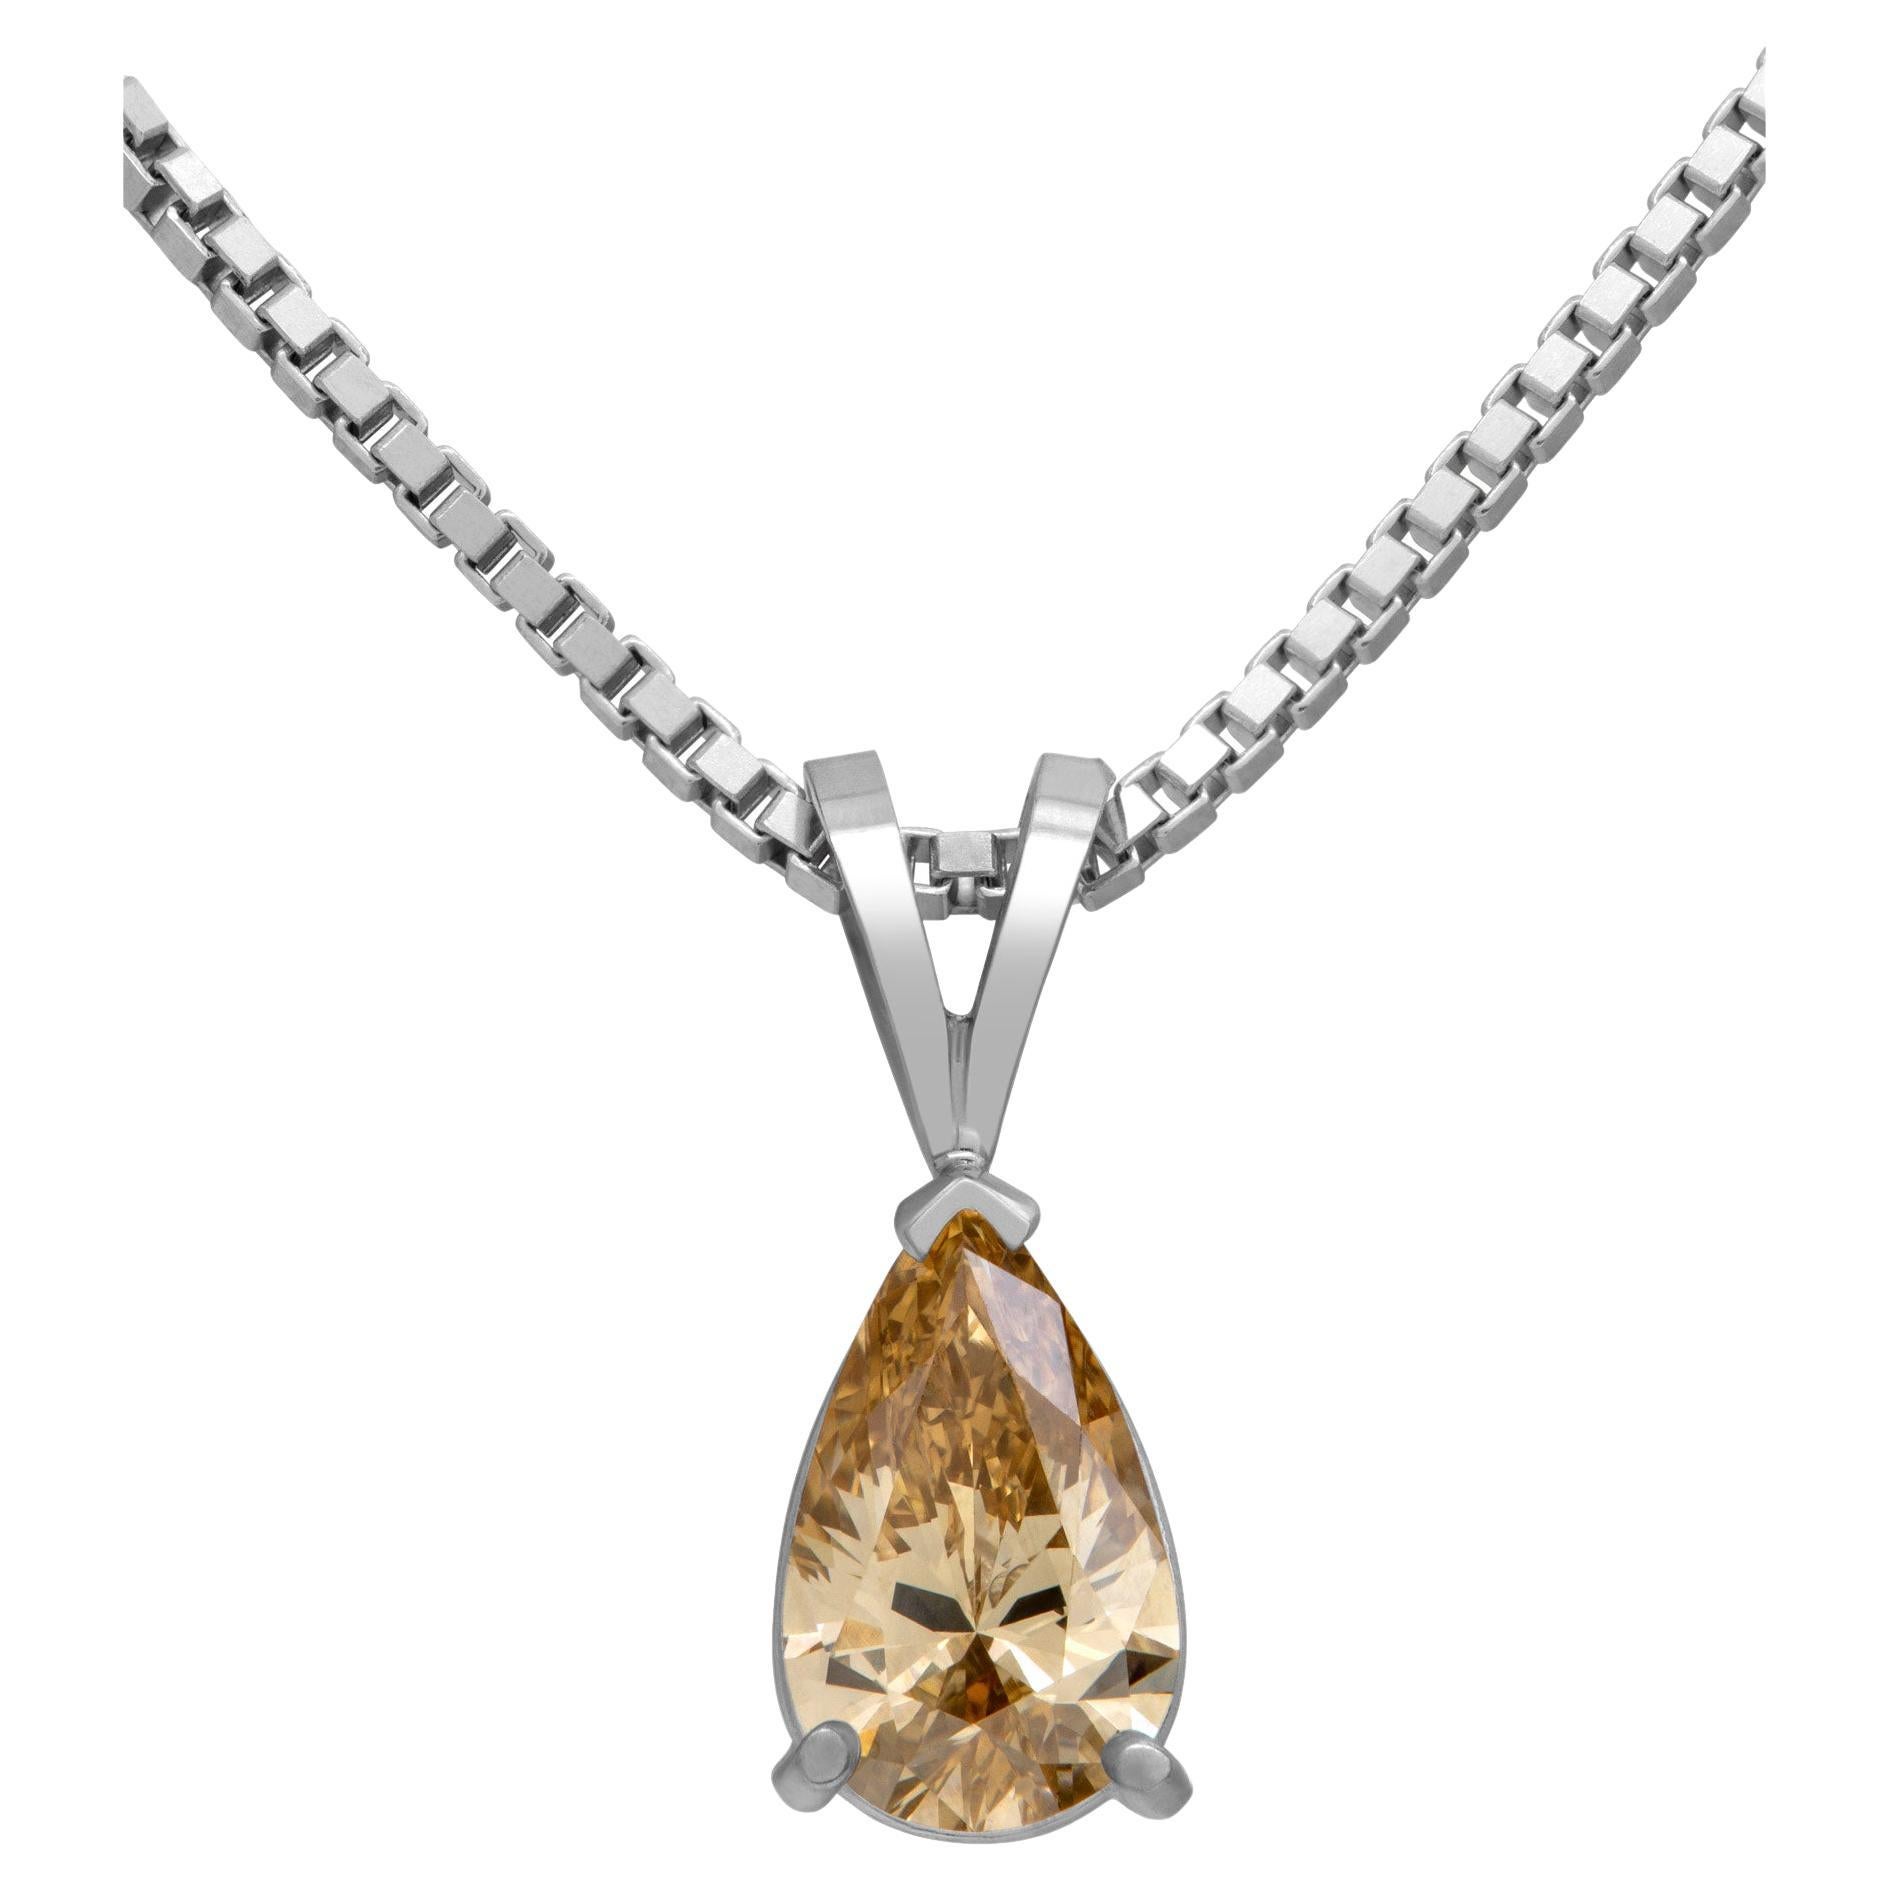 GIA Certified 1.11 Carat Natural, Fancy Brown-Yellow, Even VS1 Pear Cut Diamond For Sale